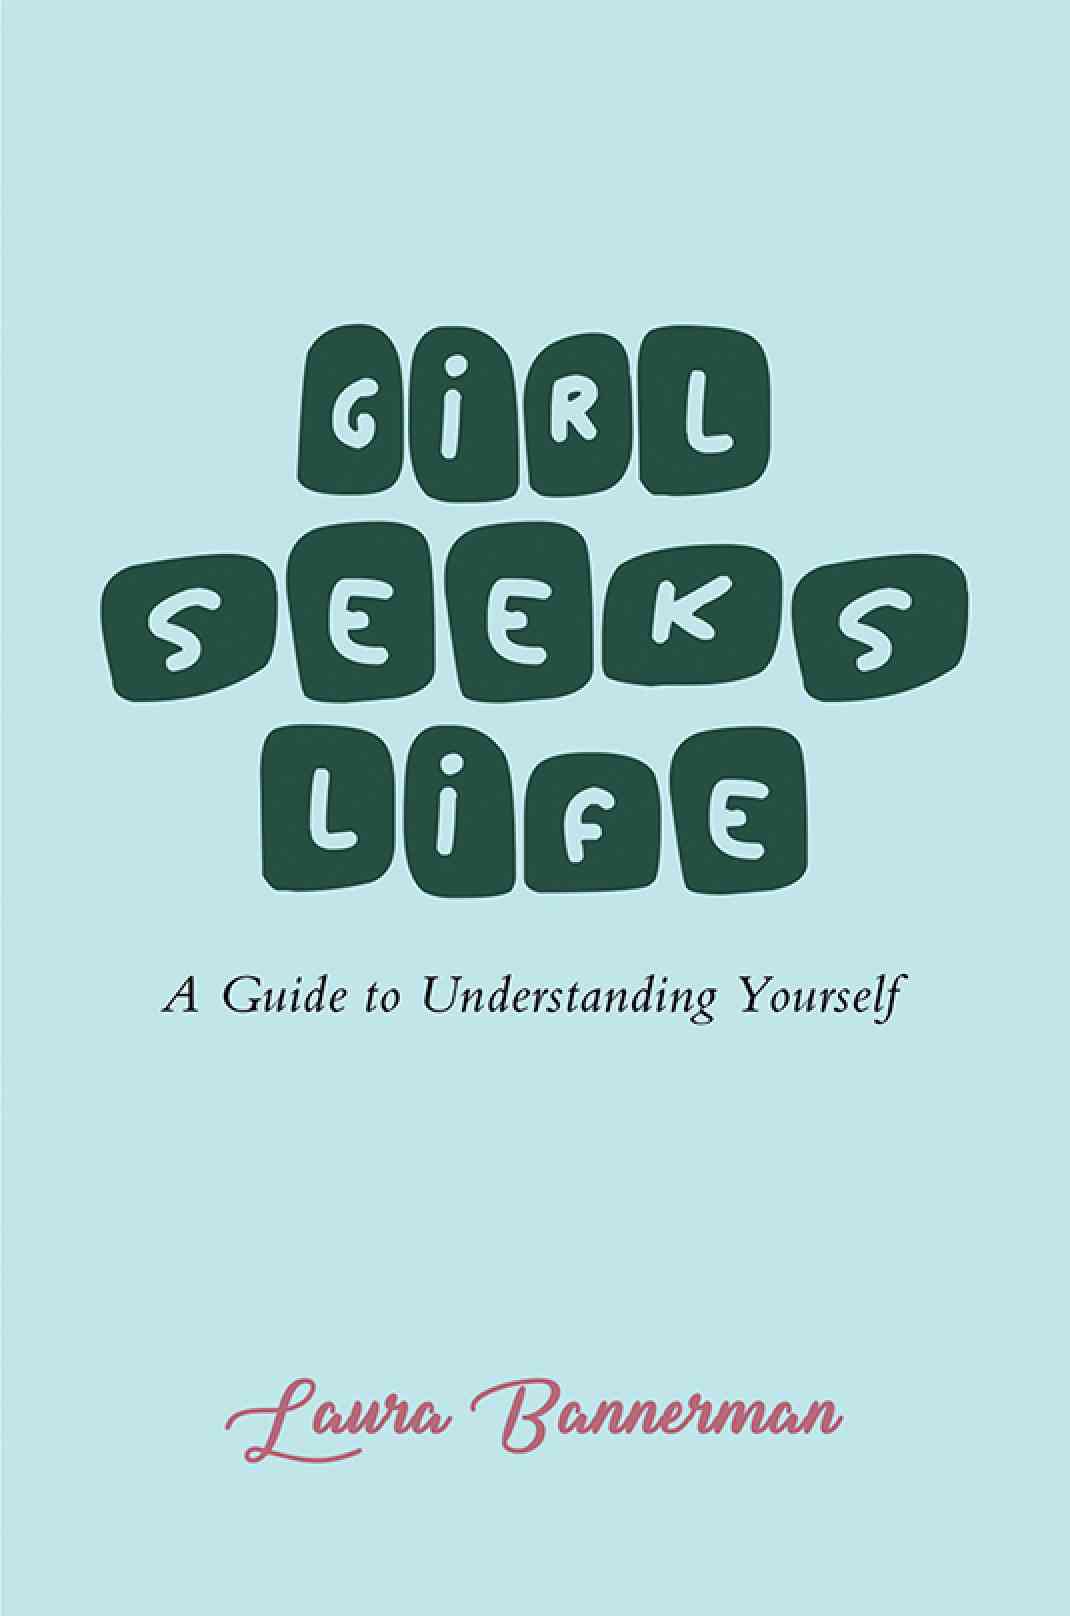 Laura Bannerman’s Acclaimed Self-Help Book Gets Featured on Pretty Progressive